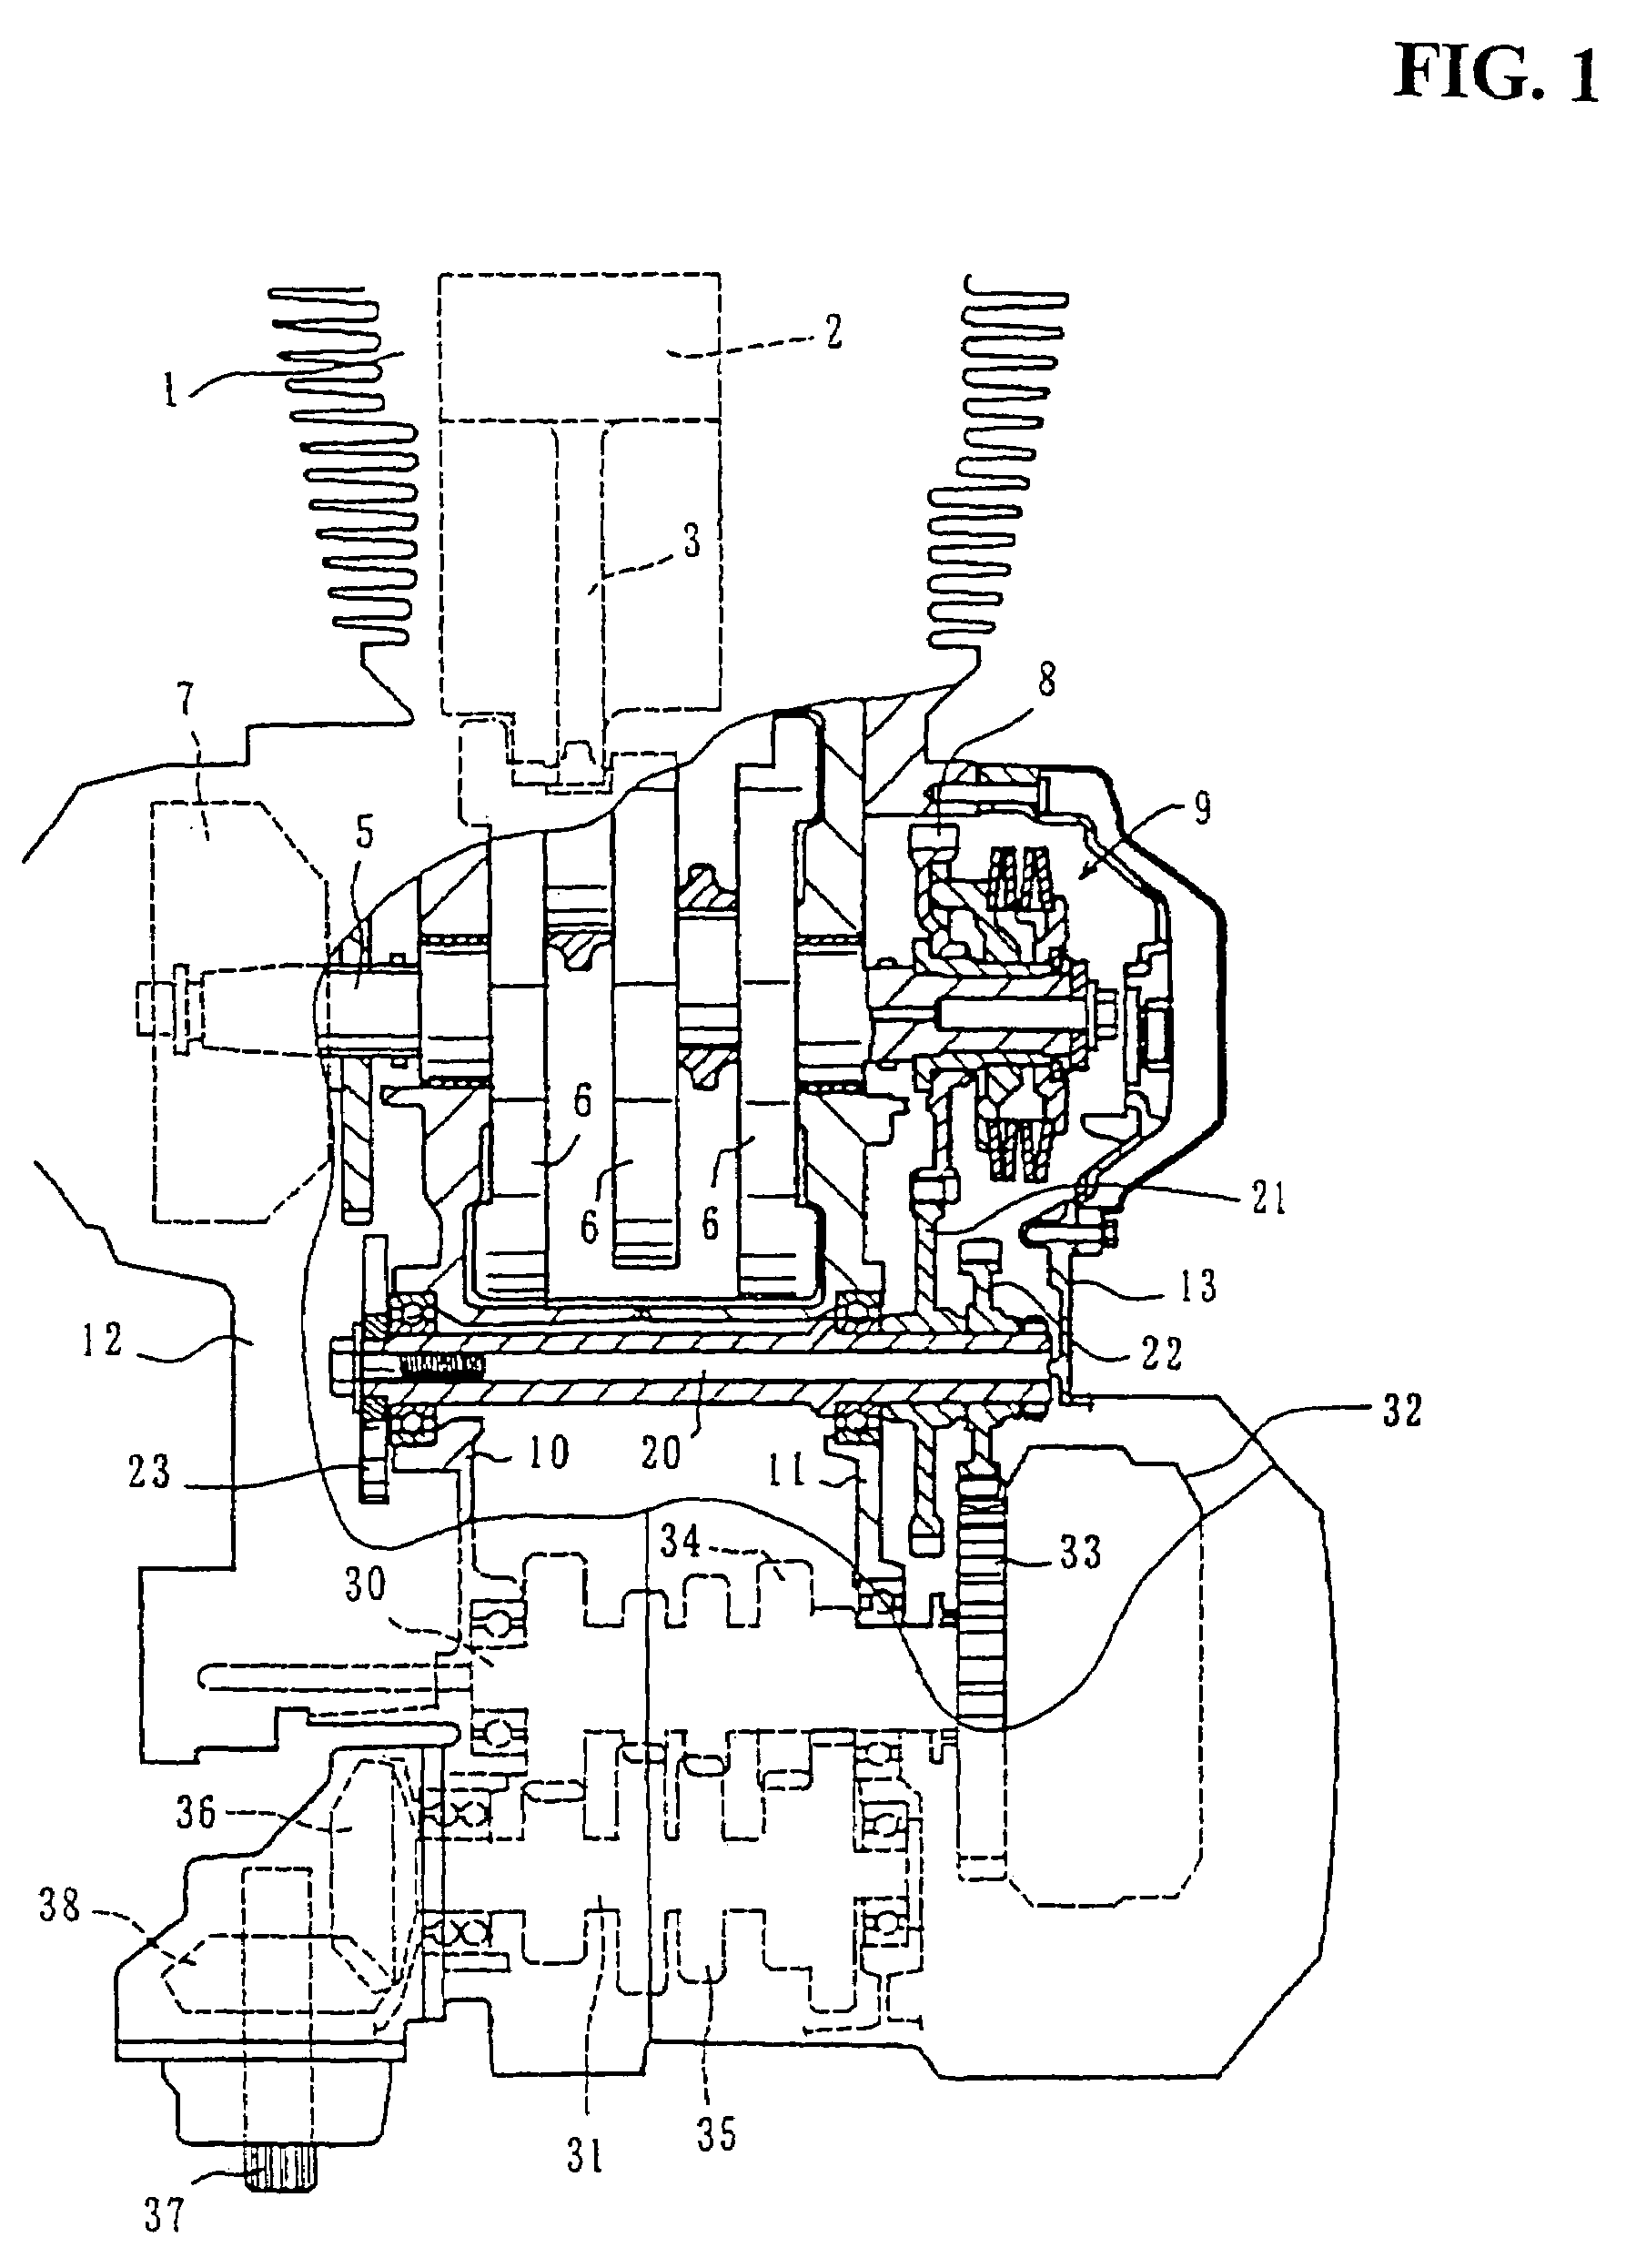 Structure for transmitting power of a motorcycle engine, and a method of assembly of said structure